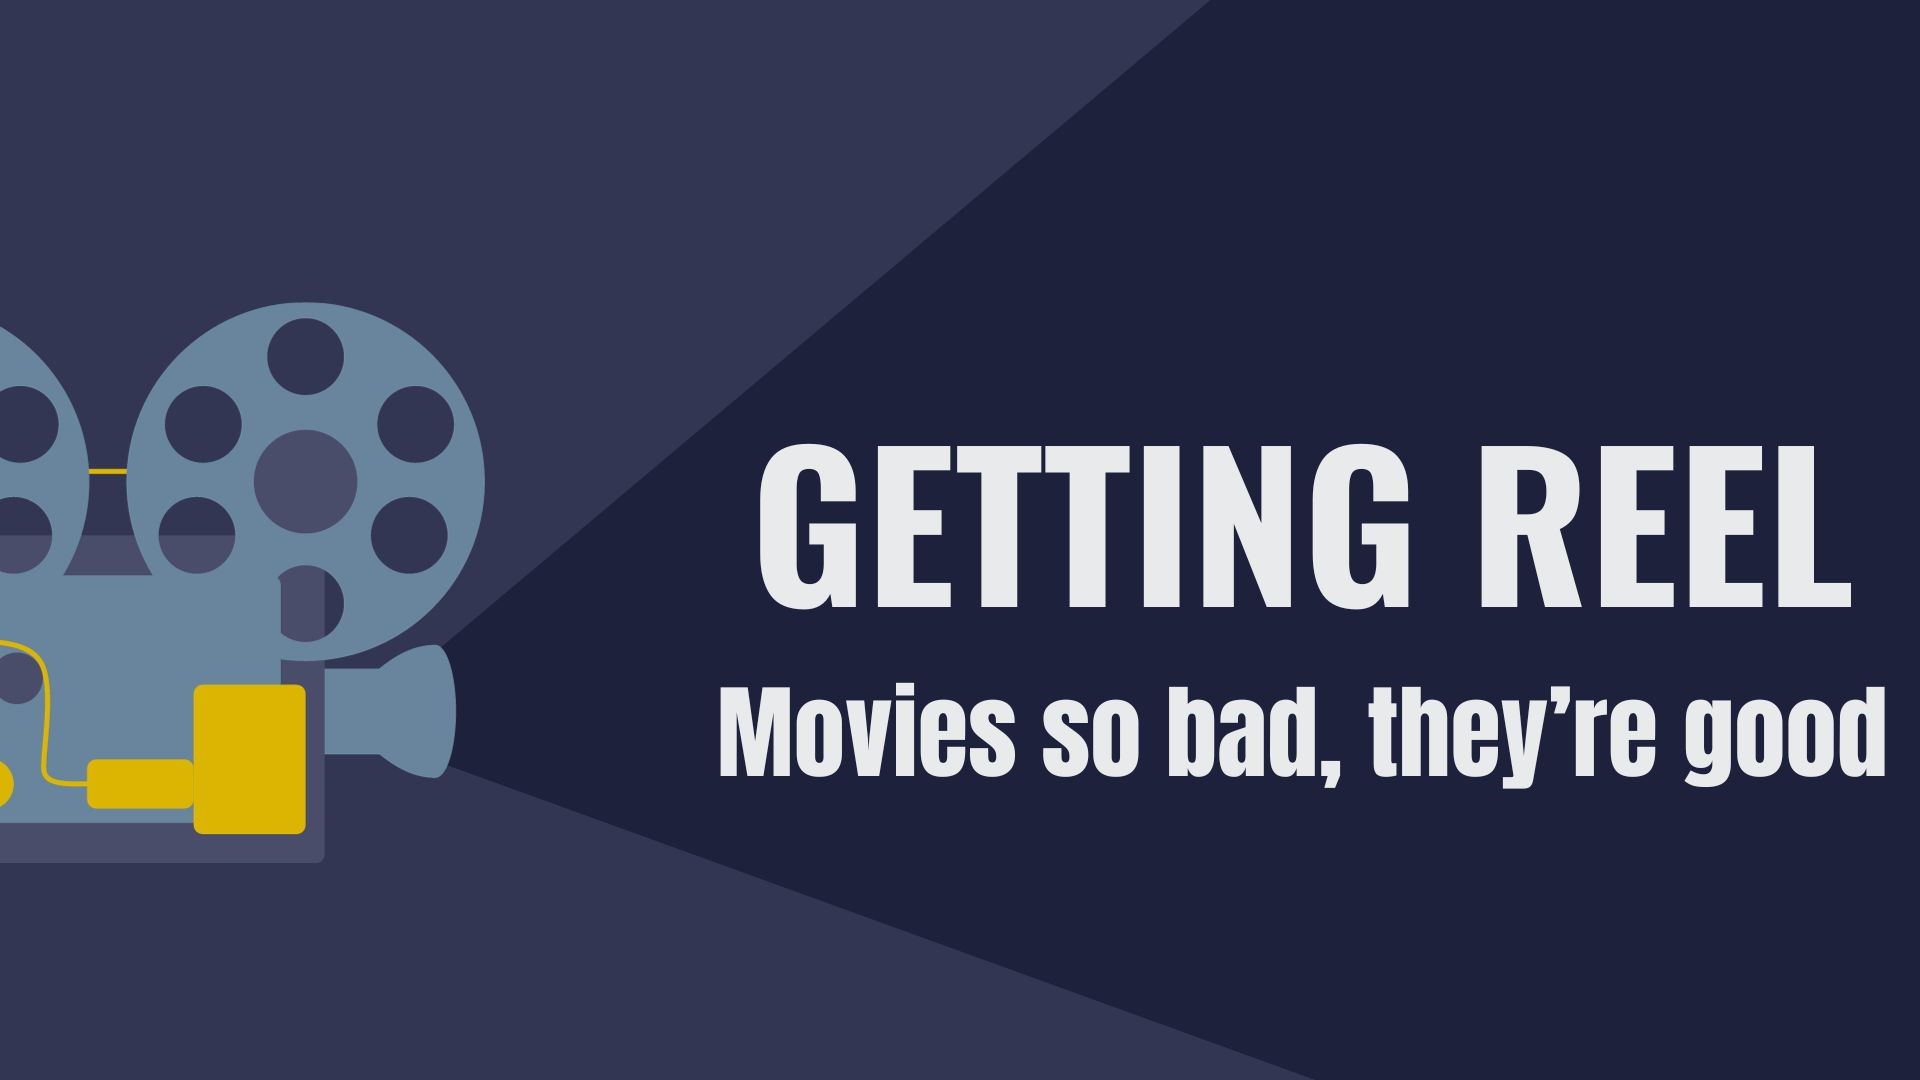 KTHV movie reviewers share some of their favorite "bad movies" that they believe are so bad, they are actually good. They involve old phones and interesting plots.